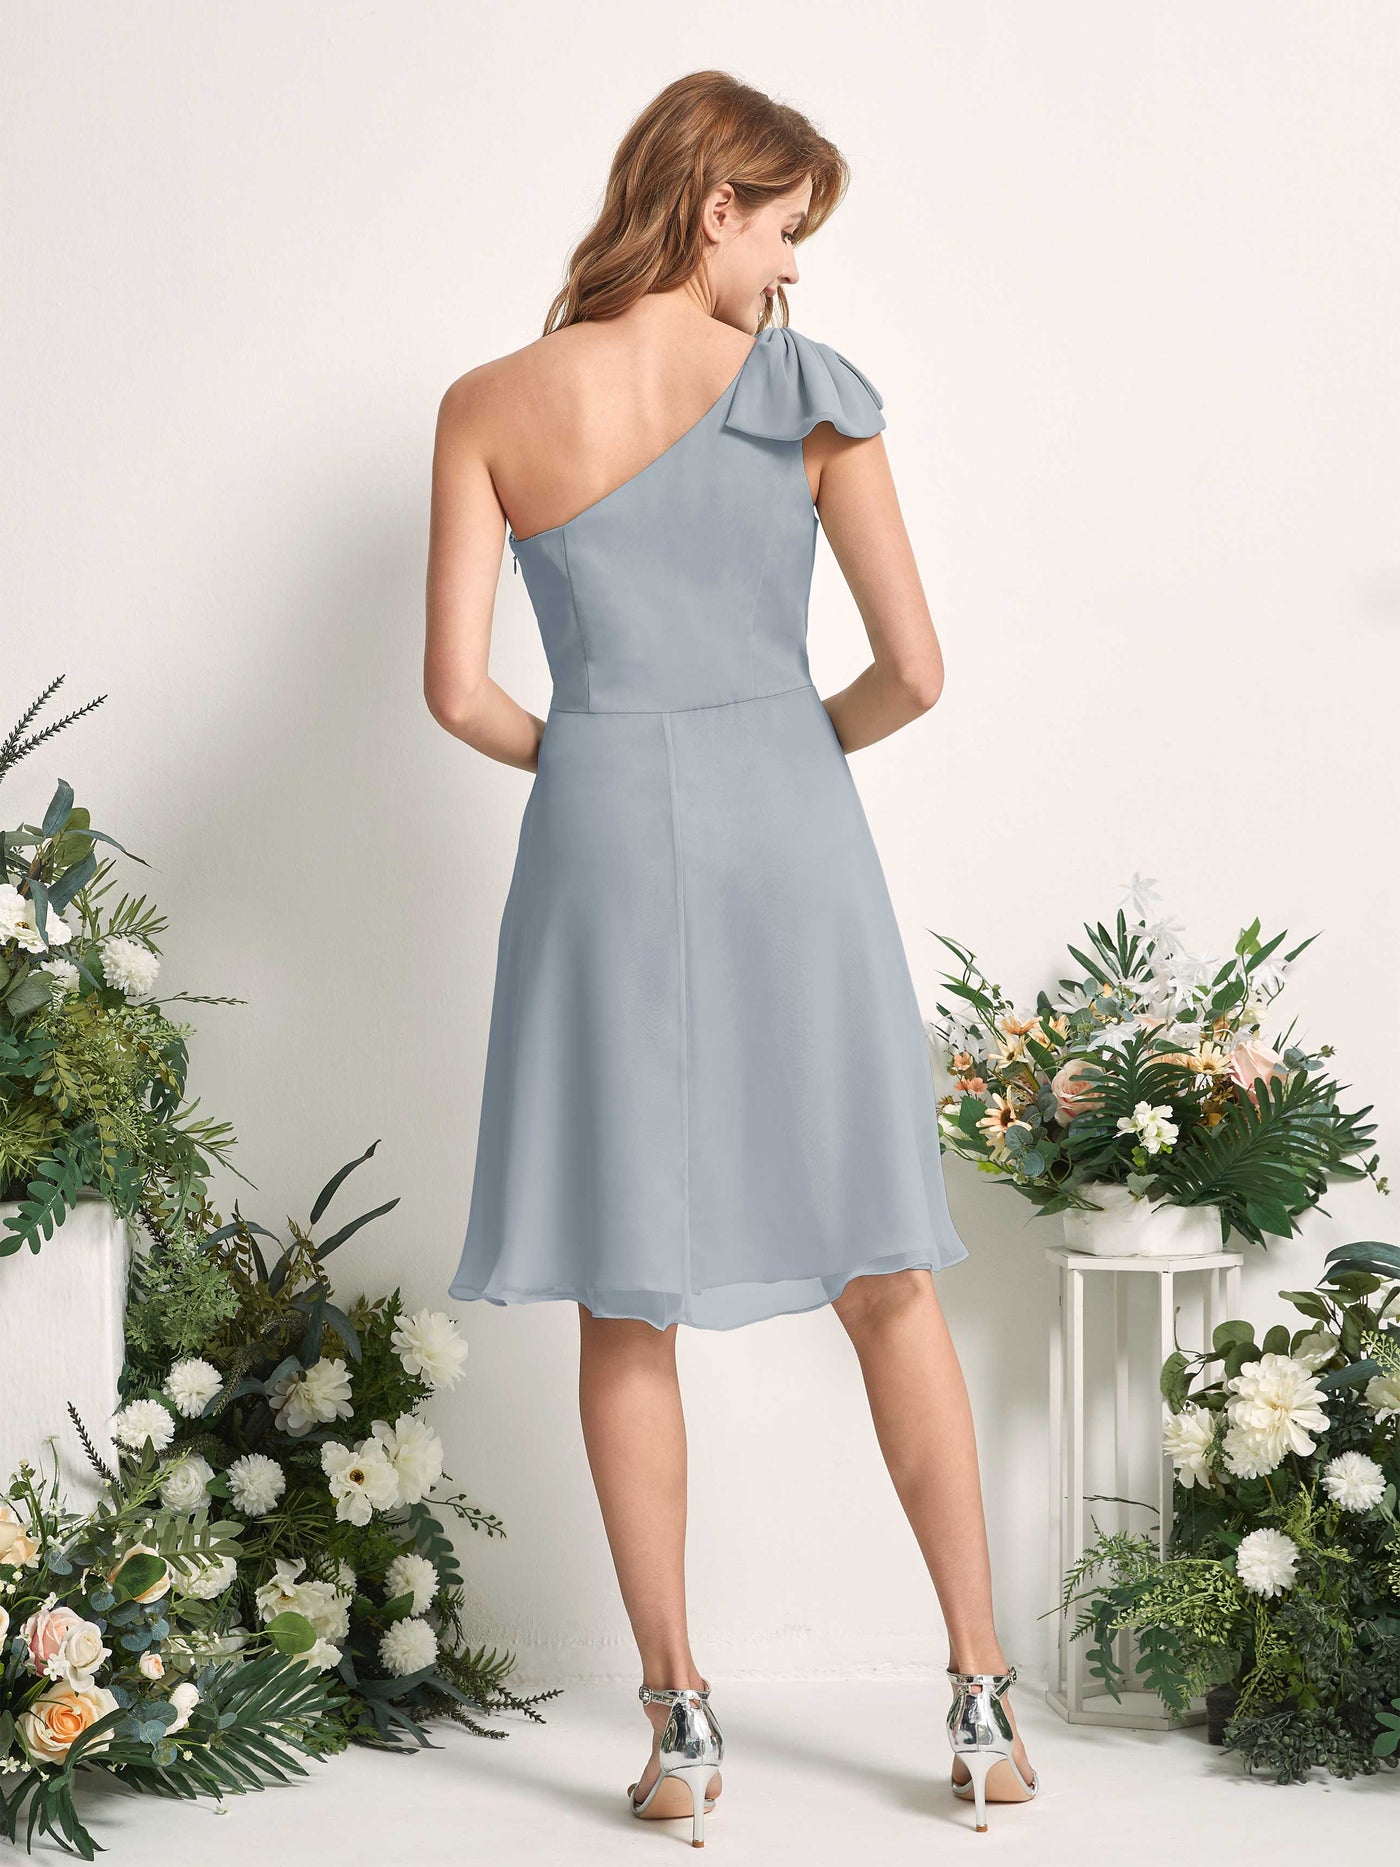 Bridesmaid Dress A-line Chiffon One Shoulder Knee Length Sleeveless Wedding Party Dress - Dusty Blue-Upgrade (81227004)#color_dusty-blue-upgrade